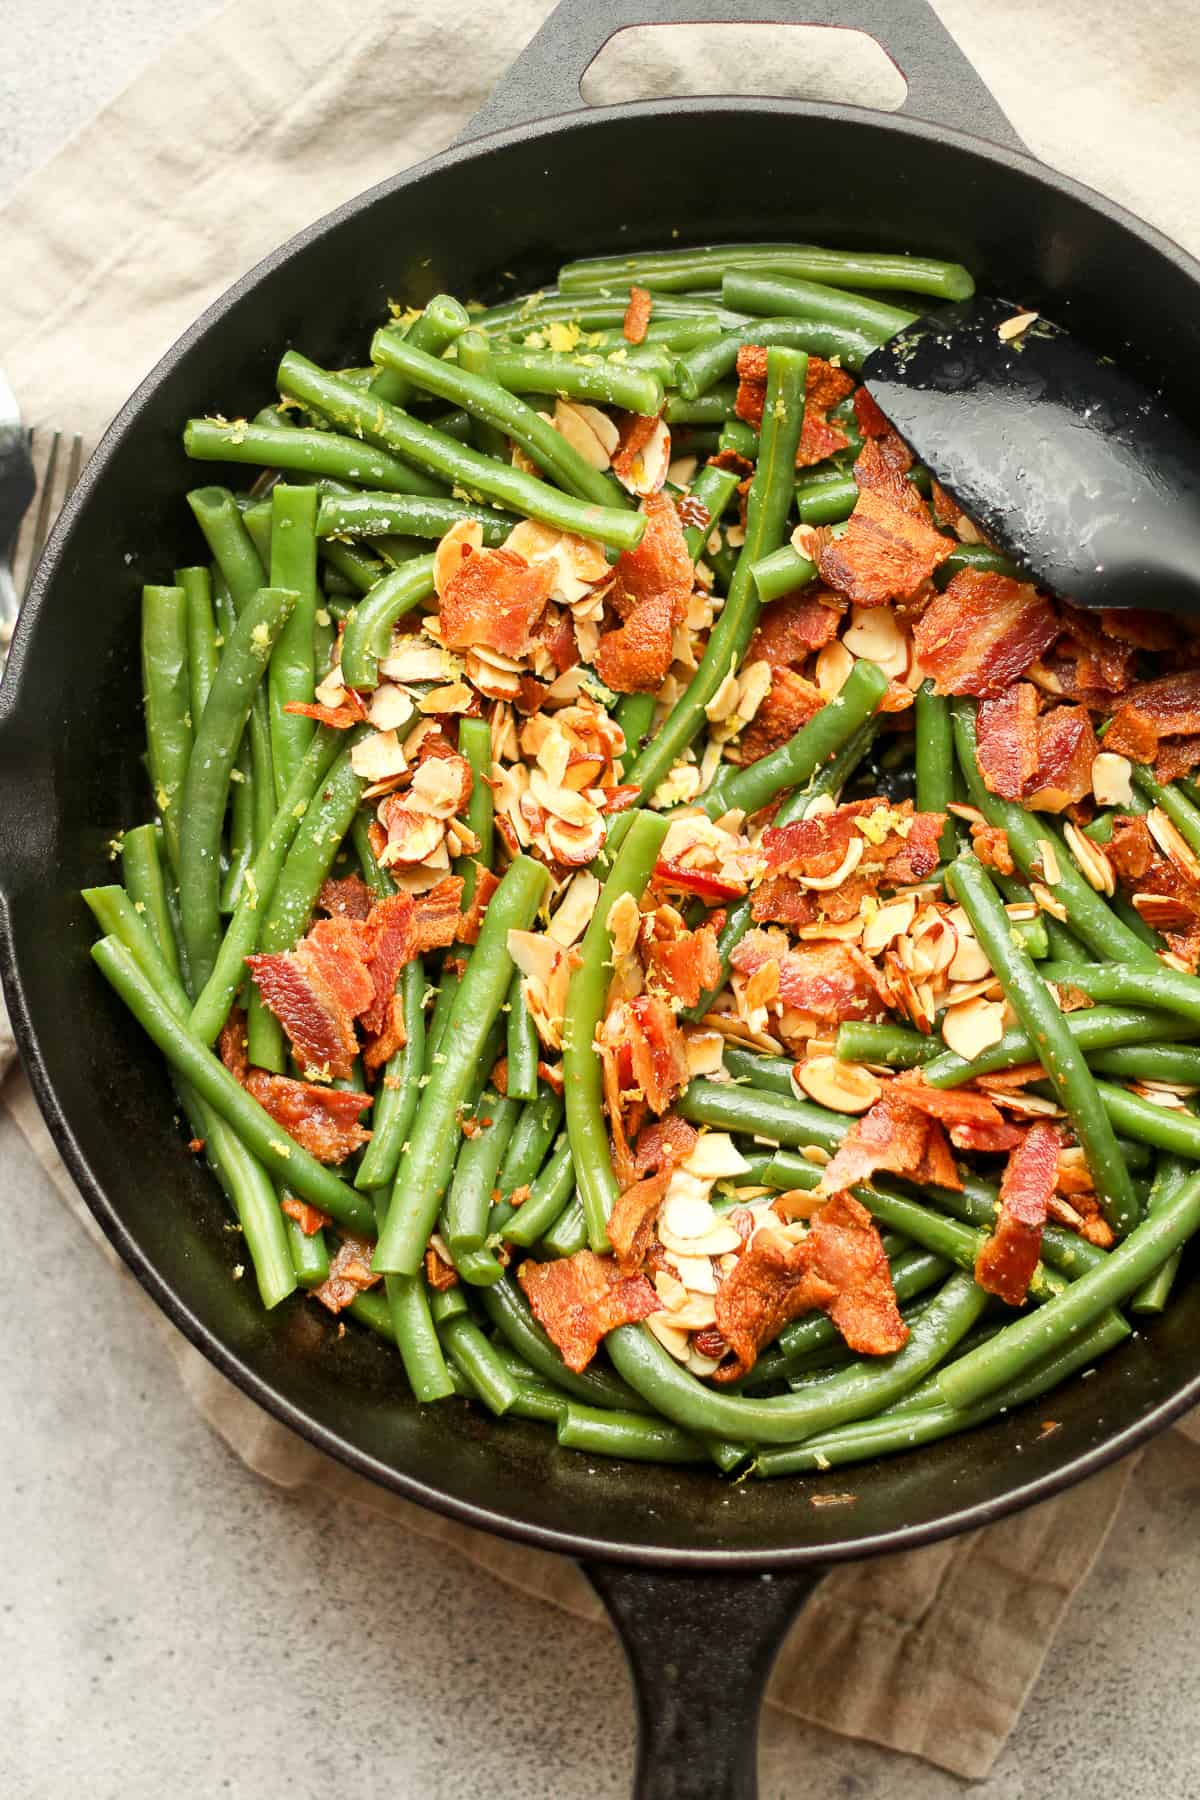 Overhead view of a skillet of green bean almandine with bacon.